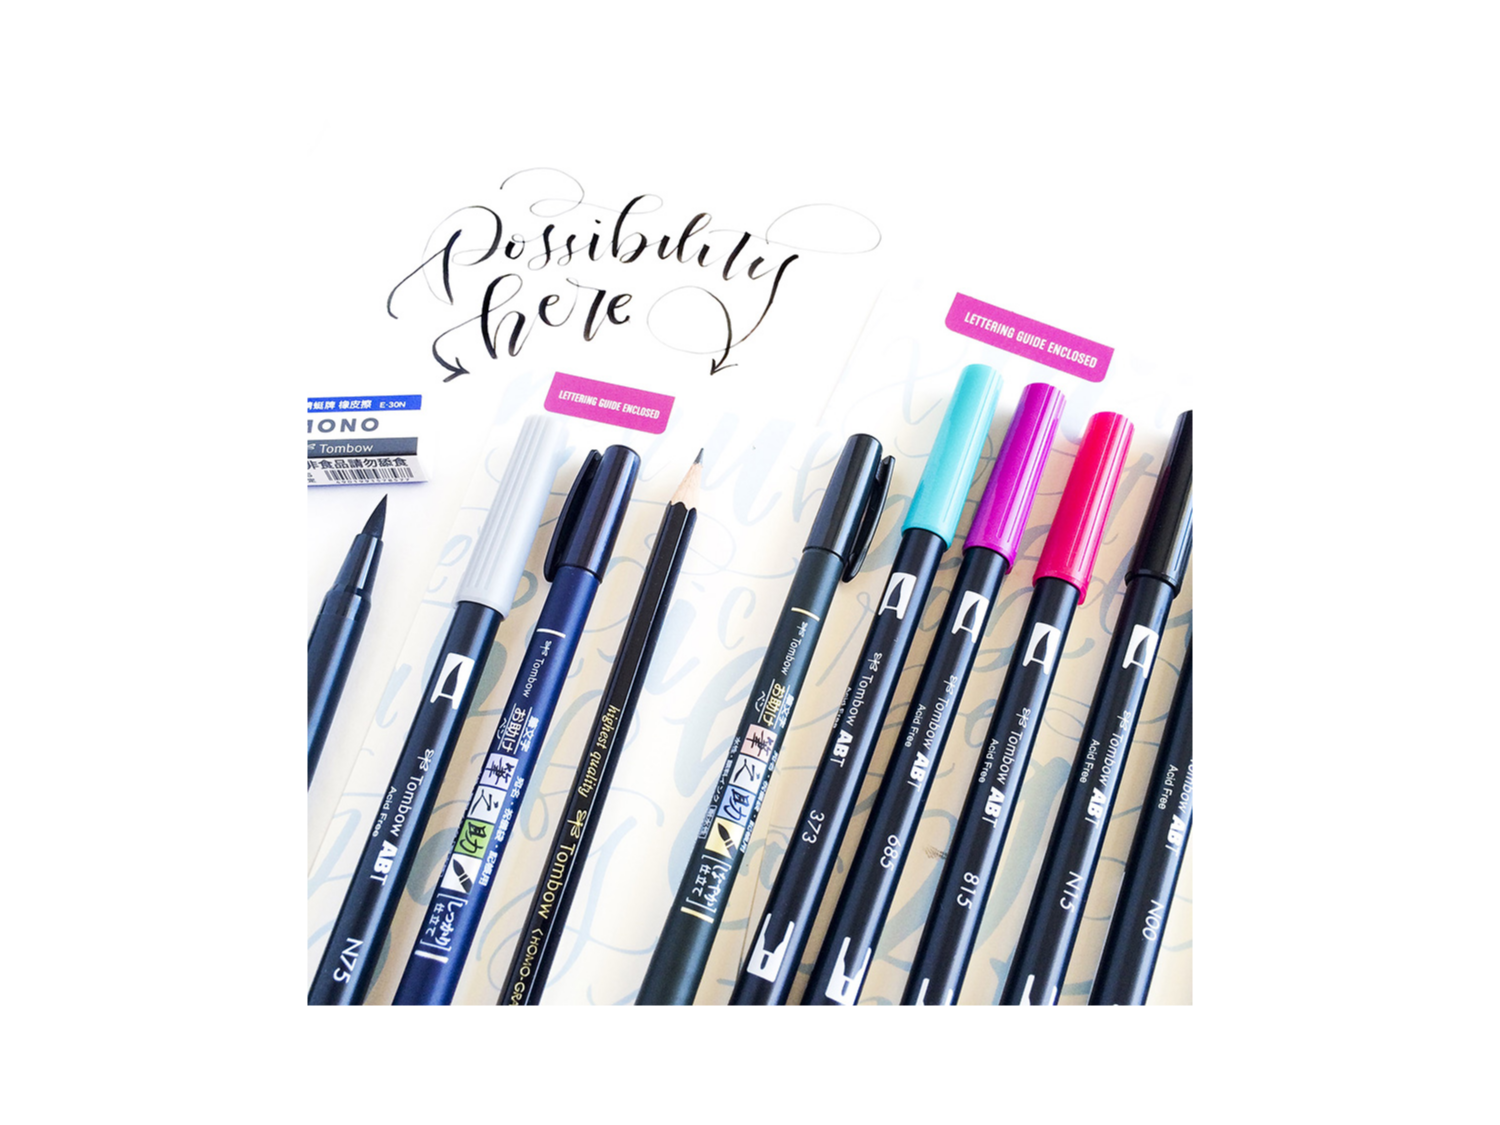 Tombow • Lettering set Advanced